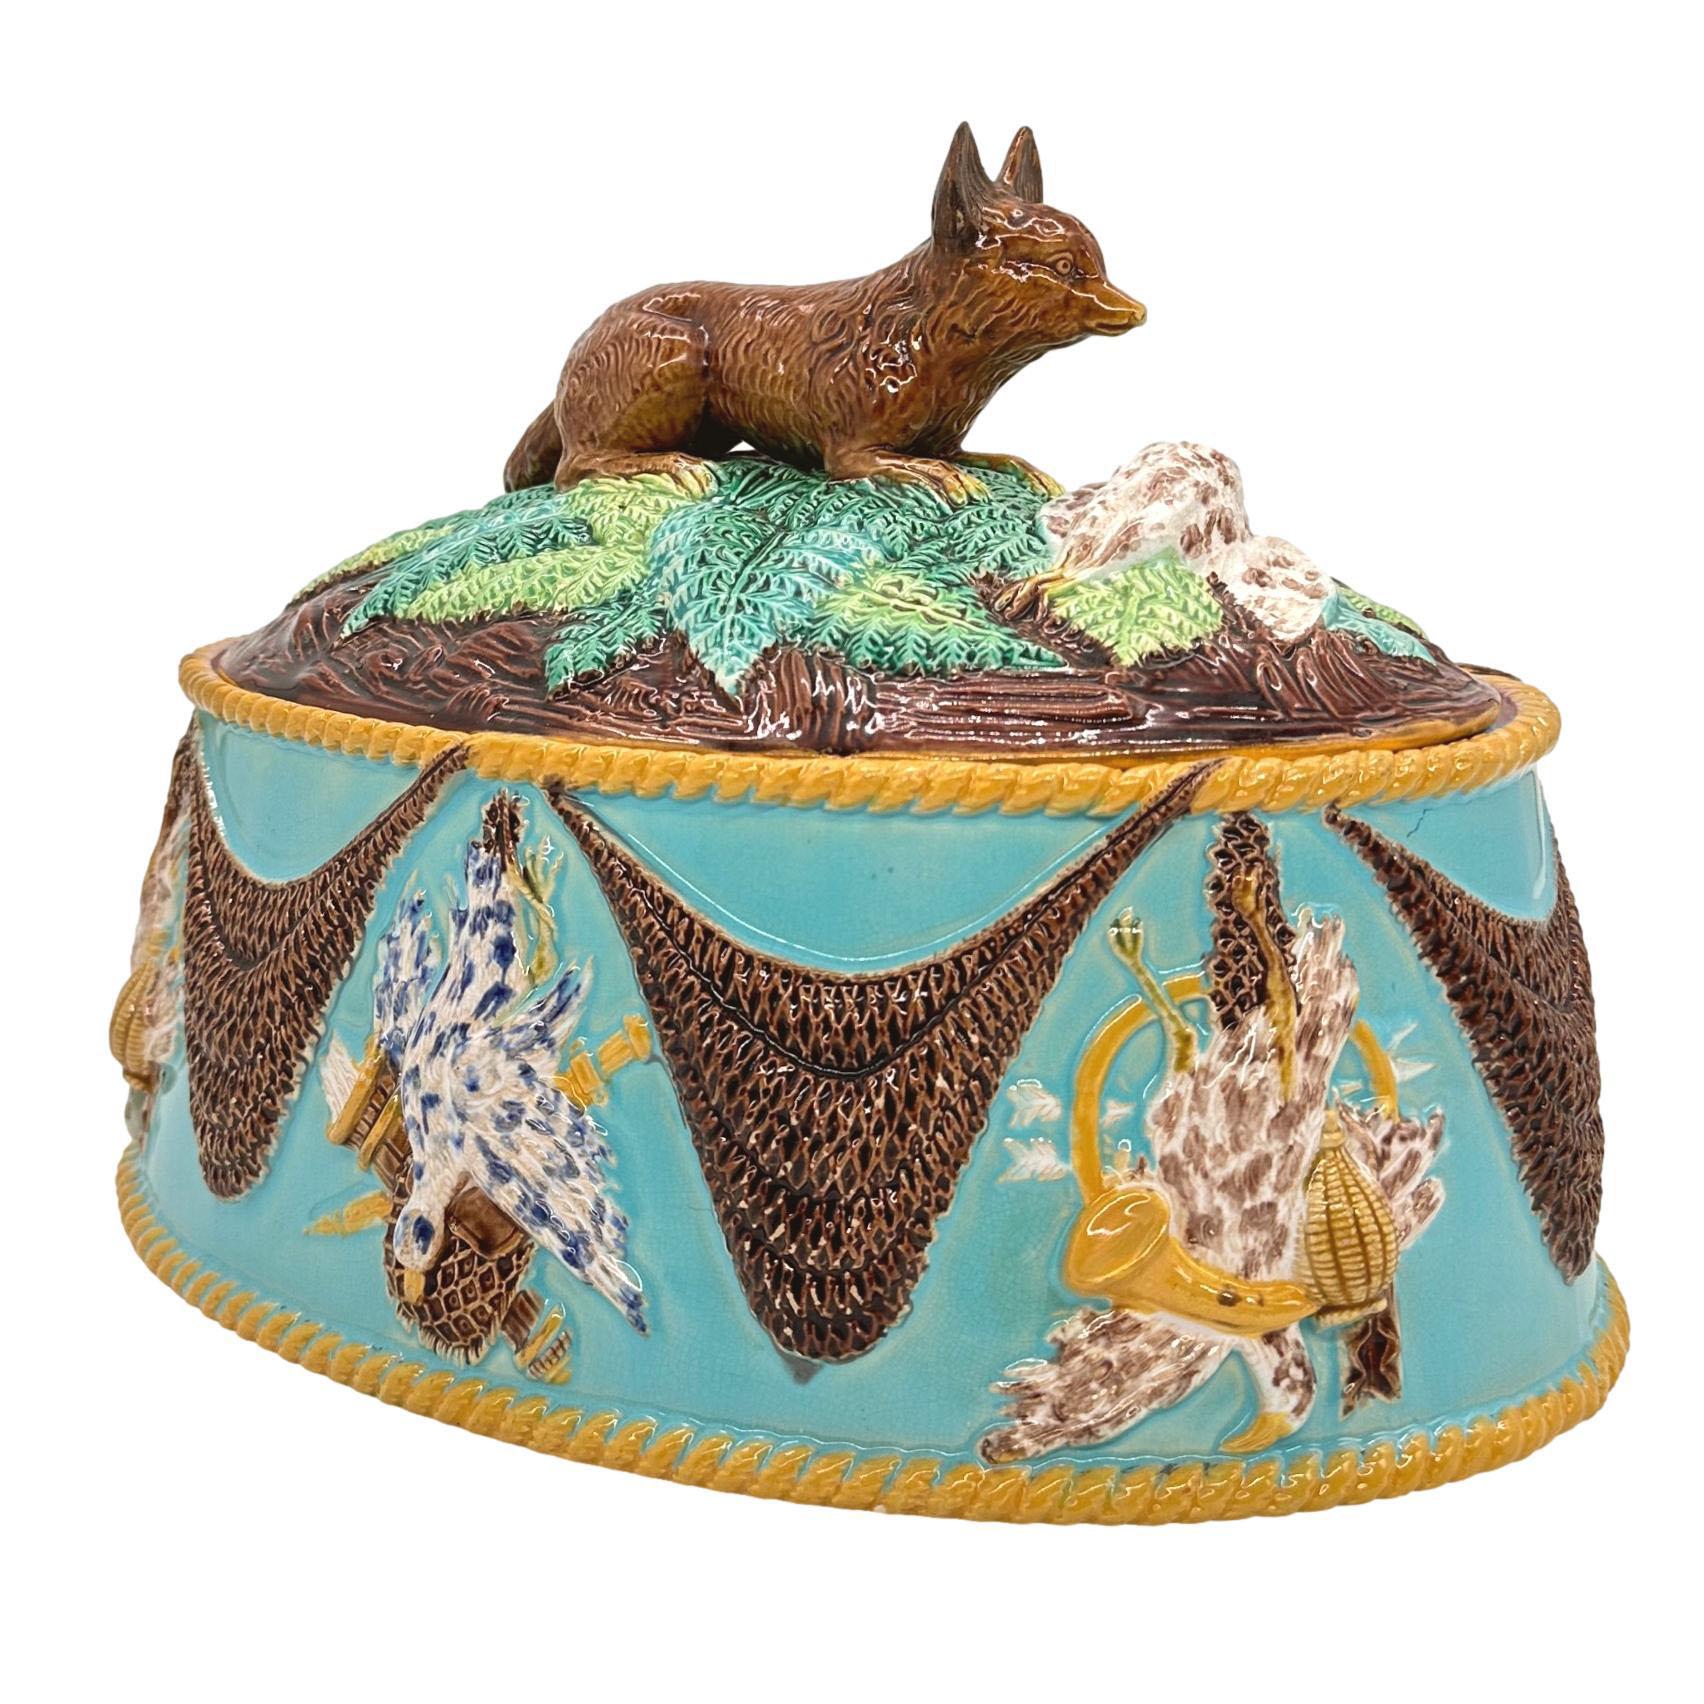 Molded George Jones Majolica Game Tureen with Fox, Turquoise Ground, English, ca. 1870 For Sale